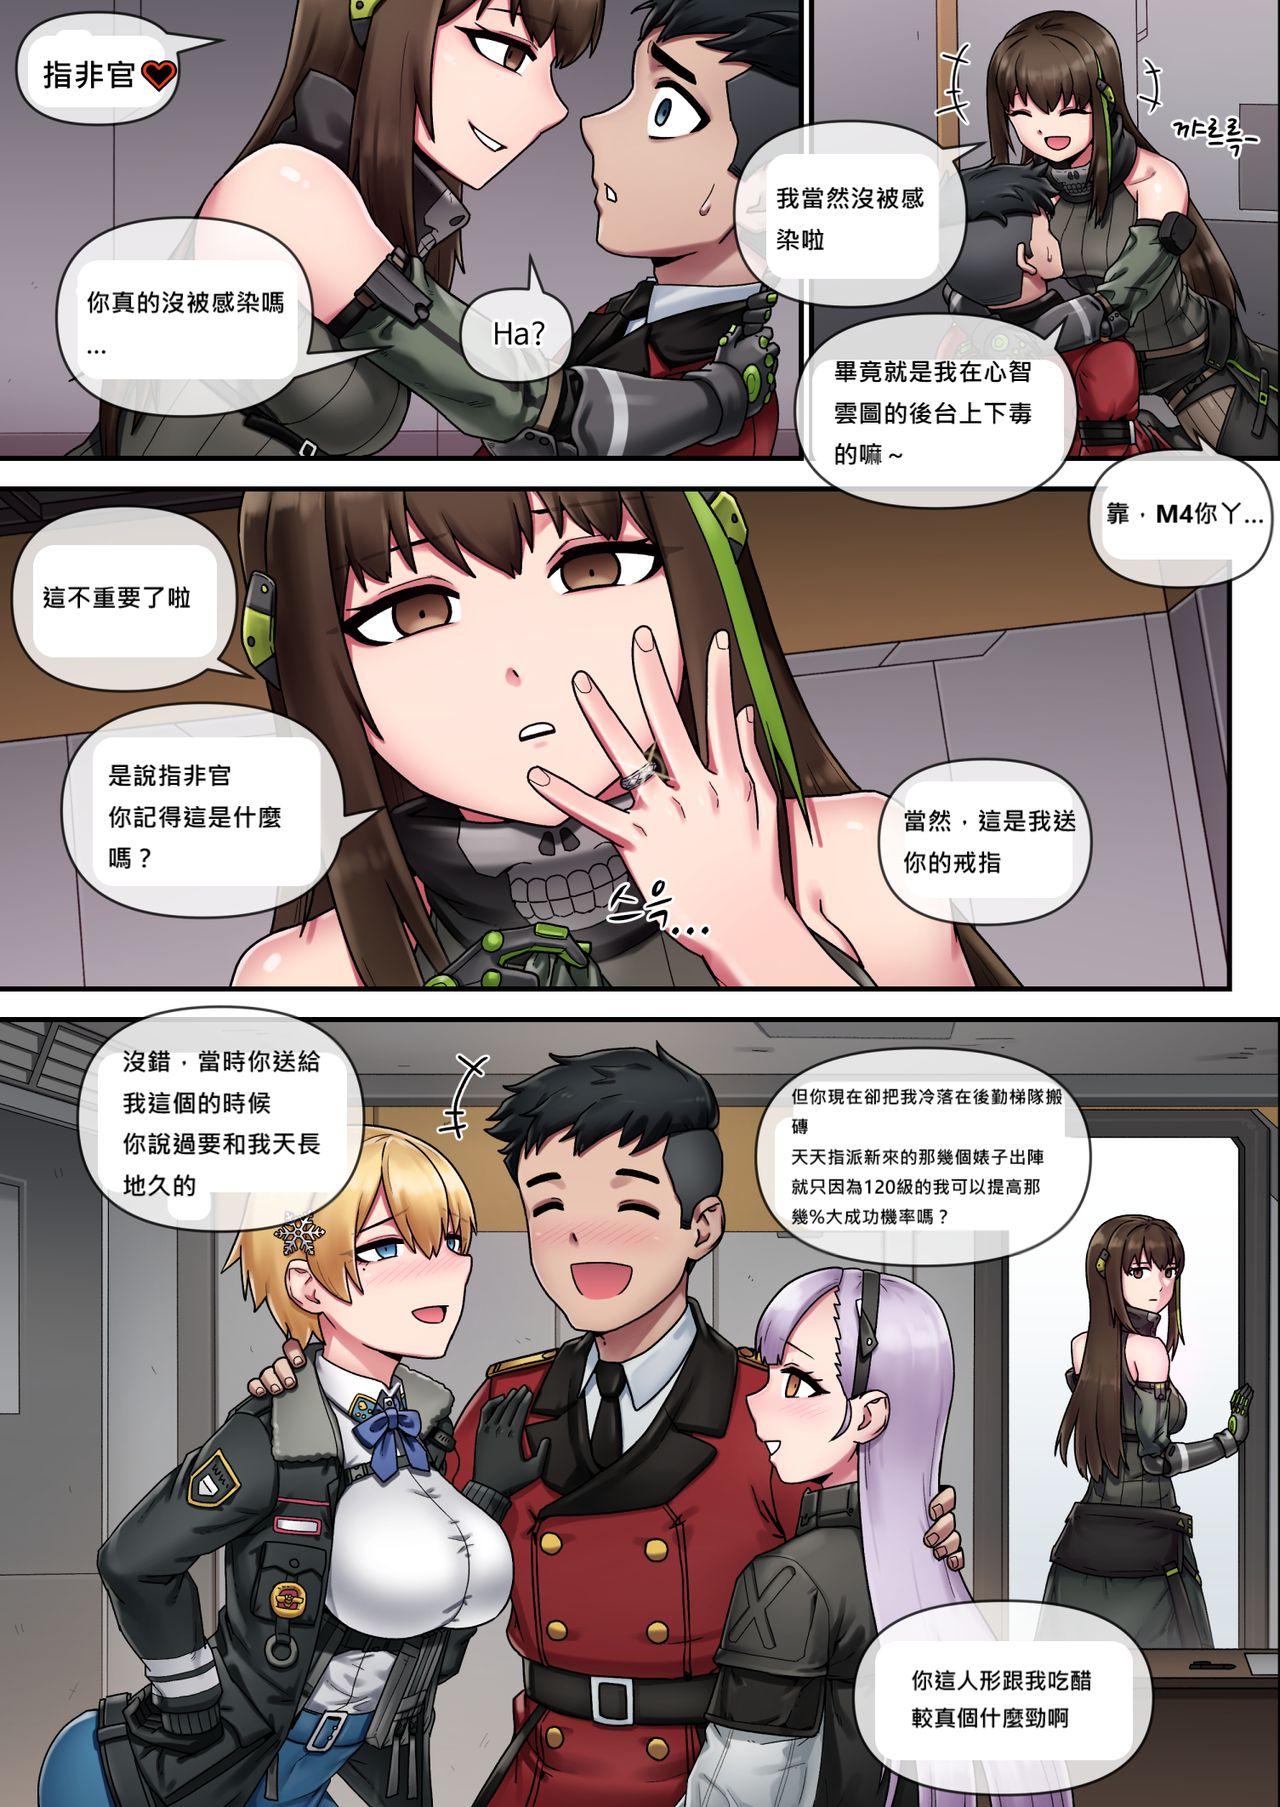 Unshaved My Only Princess - Girls frontline Pee - Page 8